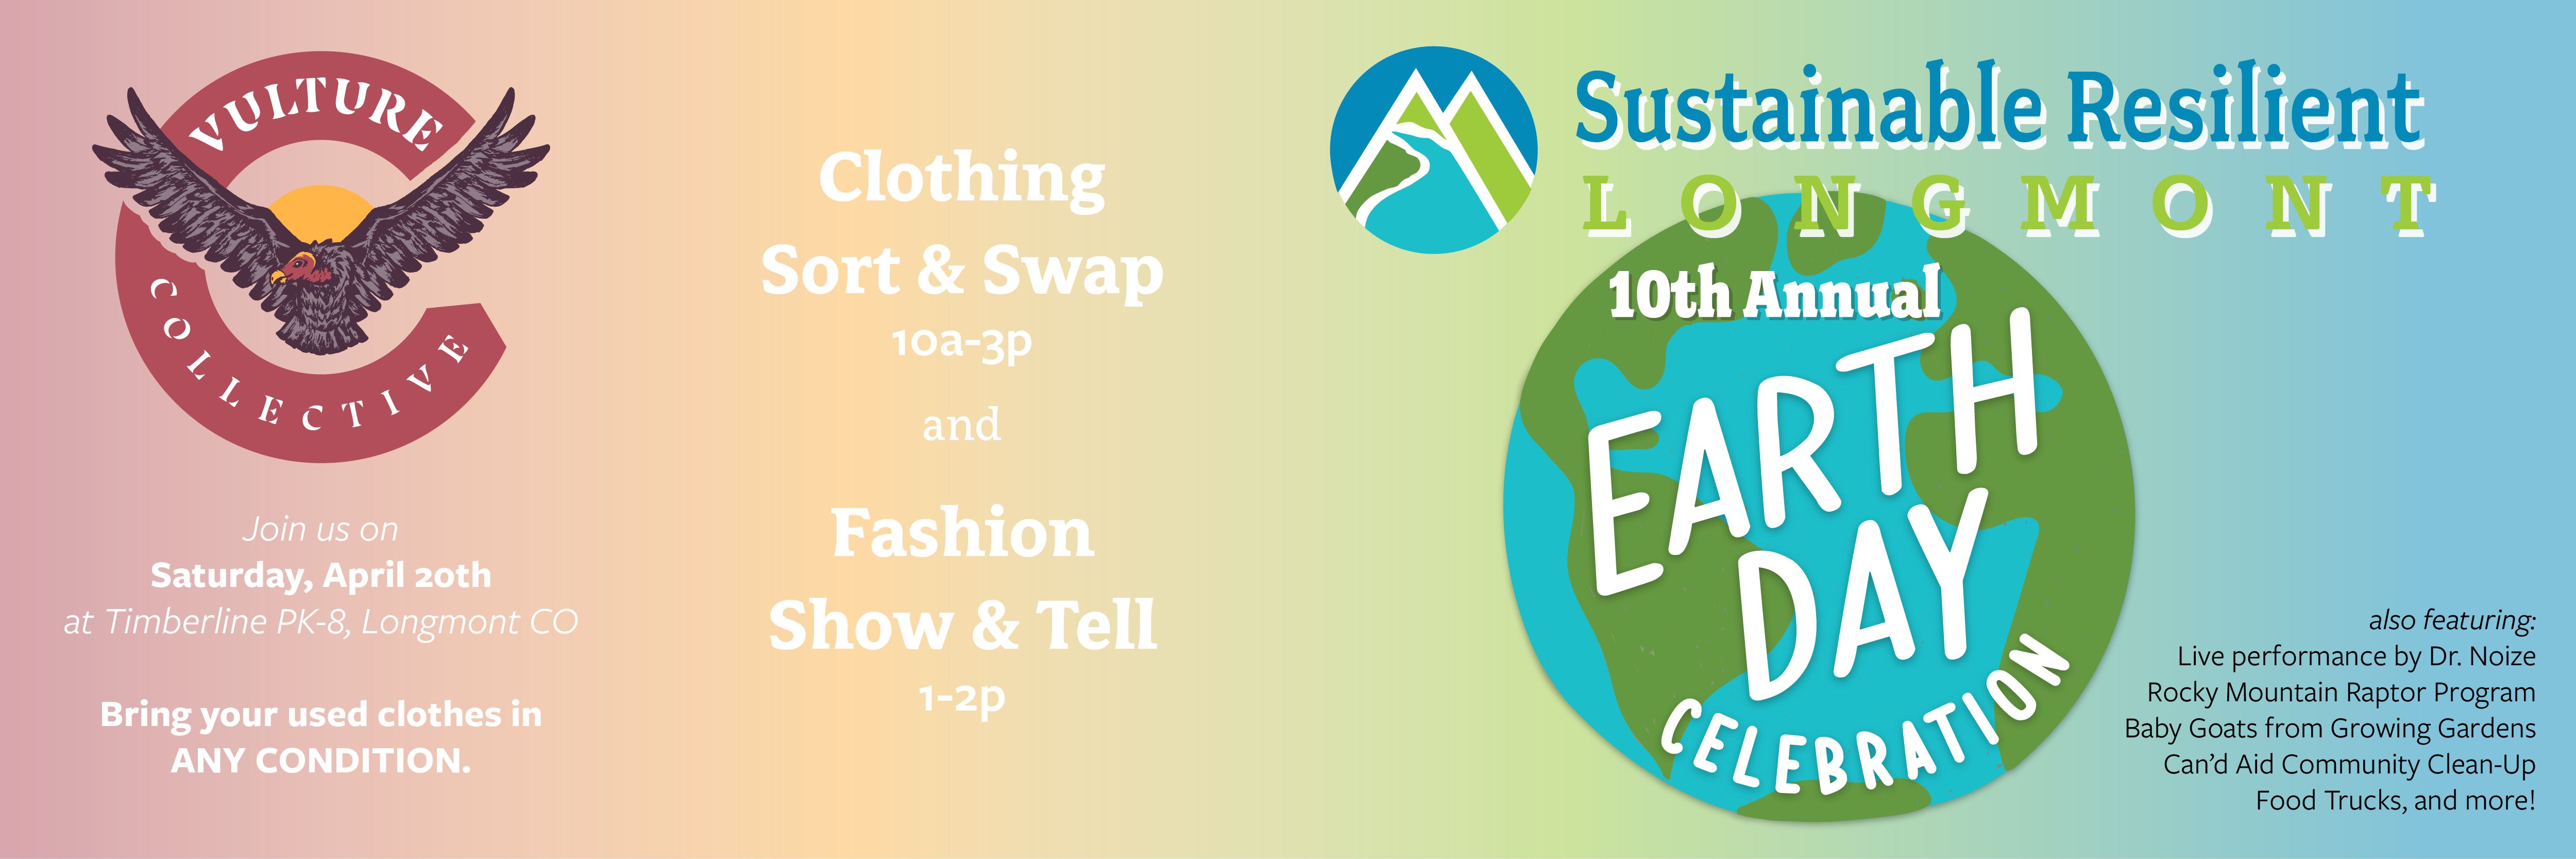 Join us on Saturday, April 20th from 10a-3p for an Earth Day Clothing Sort & Swap at Timberline PK-8 in Longmont. Image links to details page with.